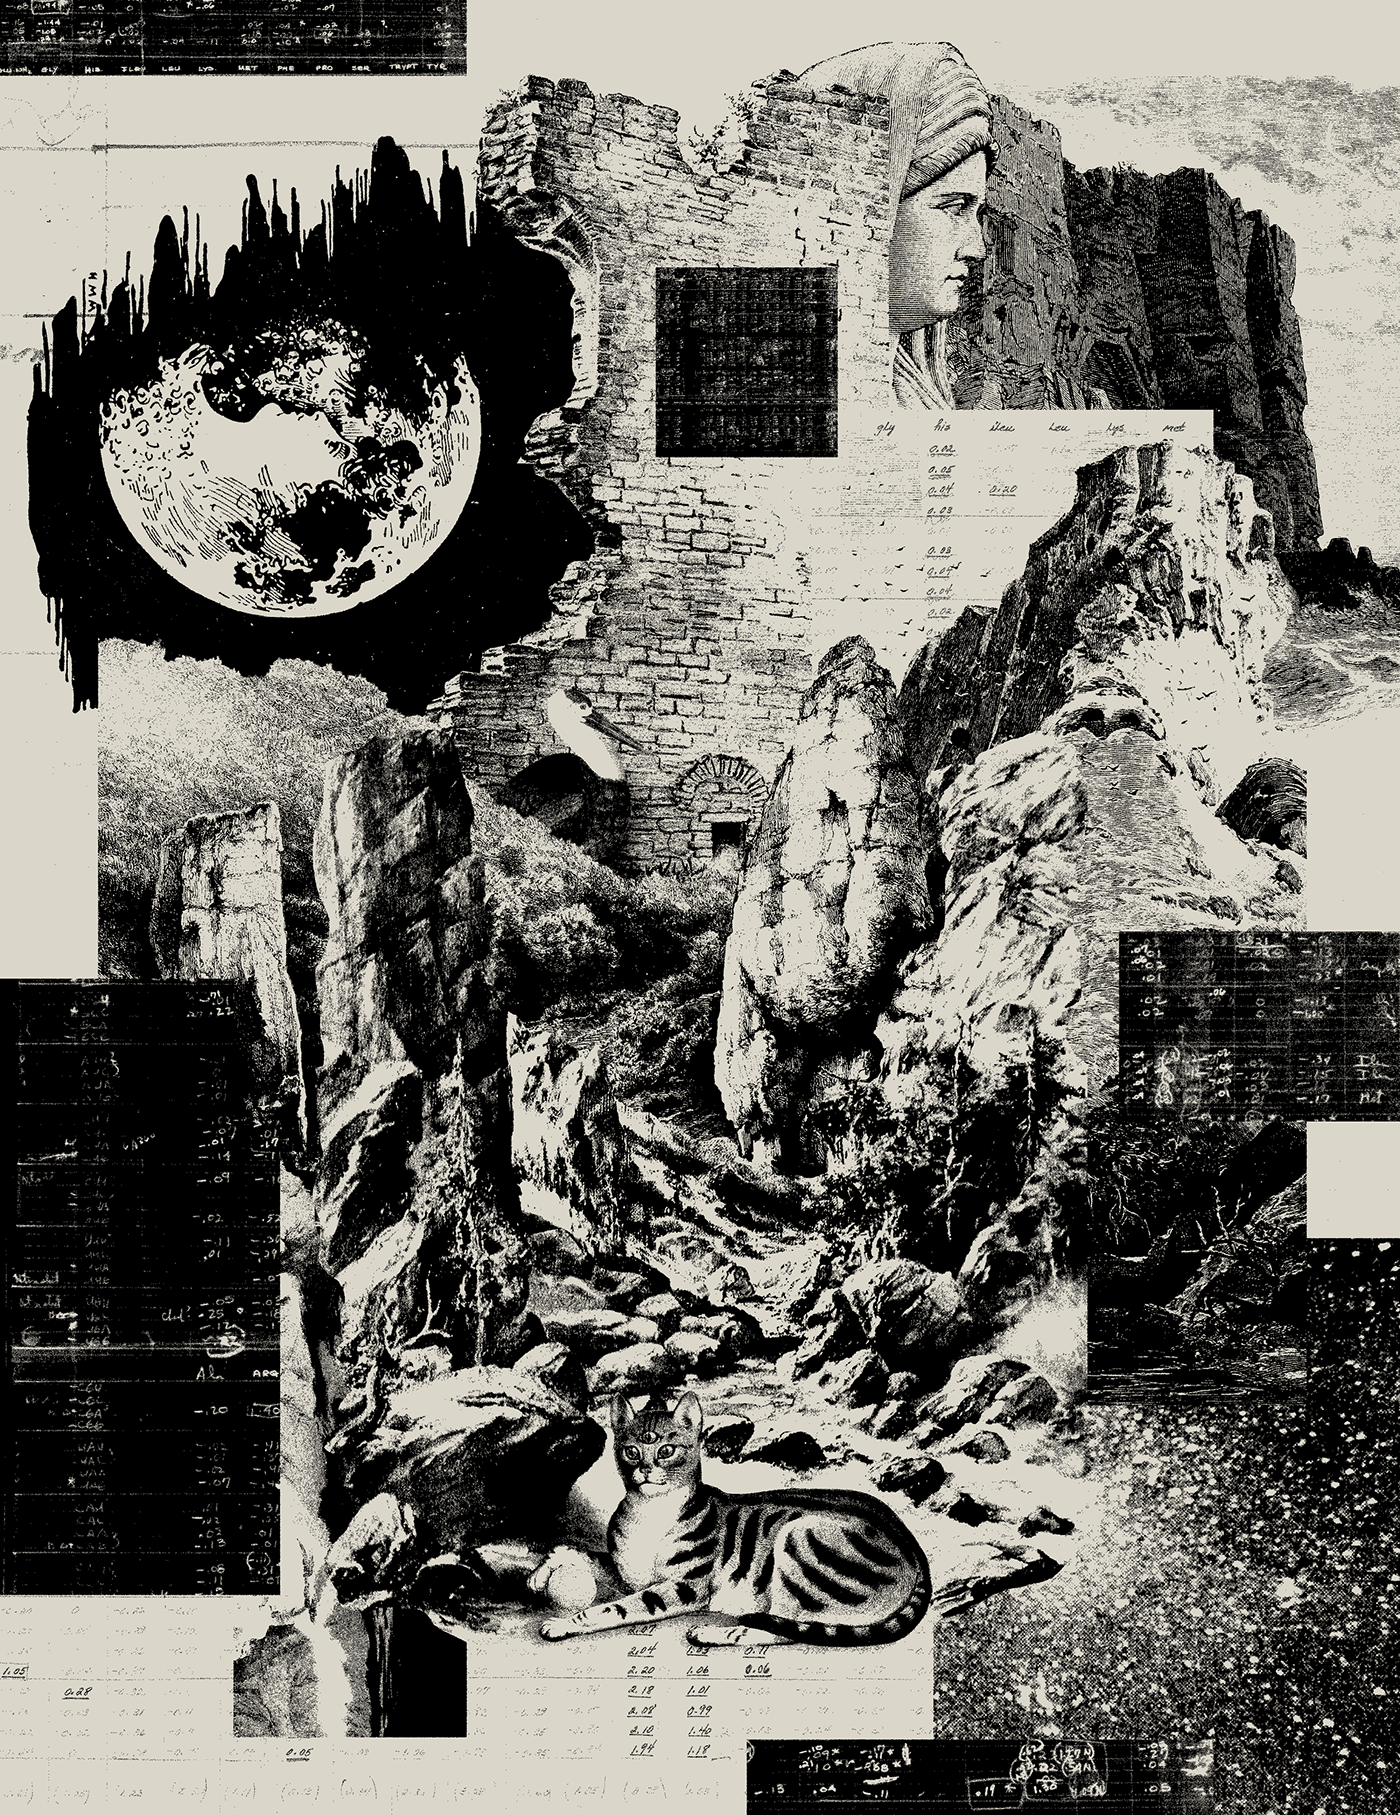 black and grey collage collage art dadaism landscapes Series Design spirituality surreal